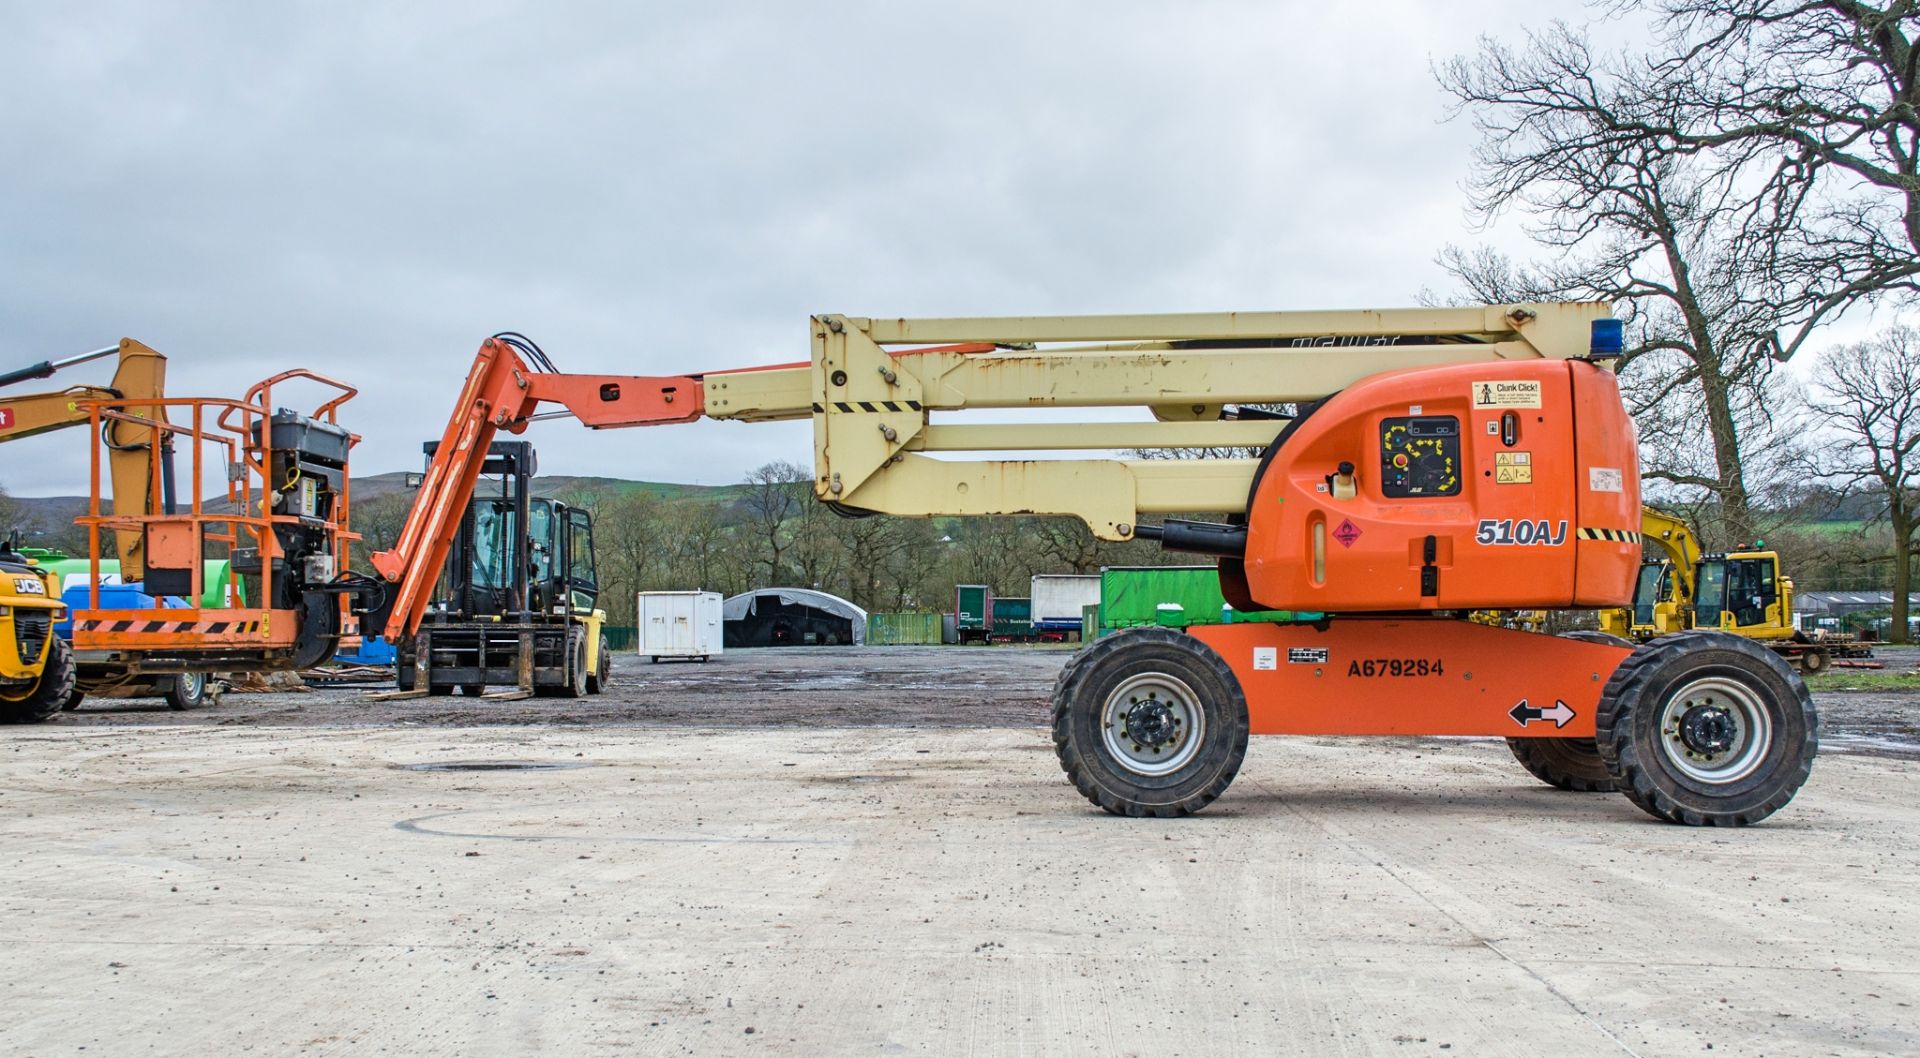 JLG 510AJ diesel driven articulated boom access platform Year: 2015 S/N: E300002191 Recorded - Image 7 of 18